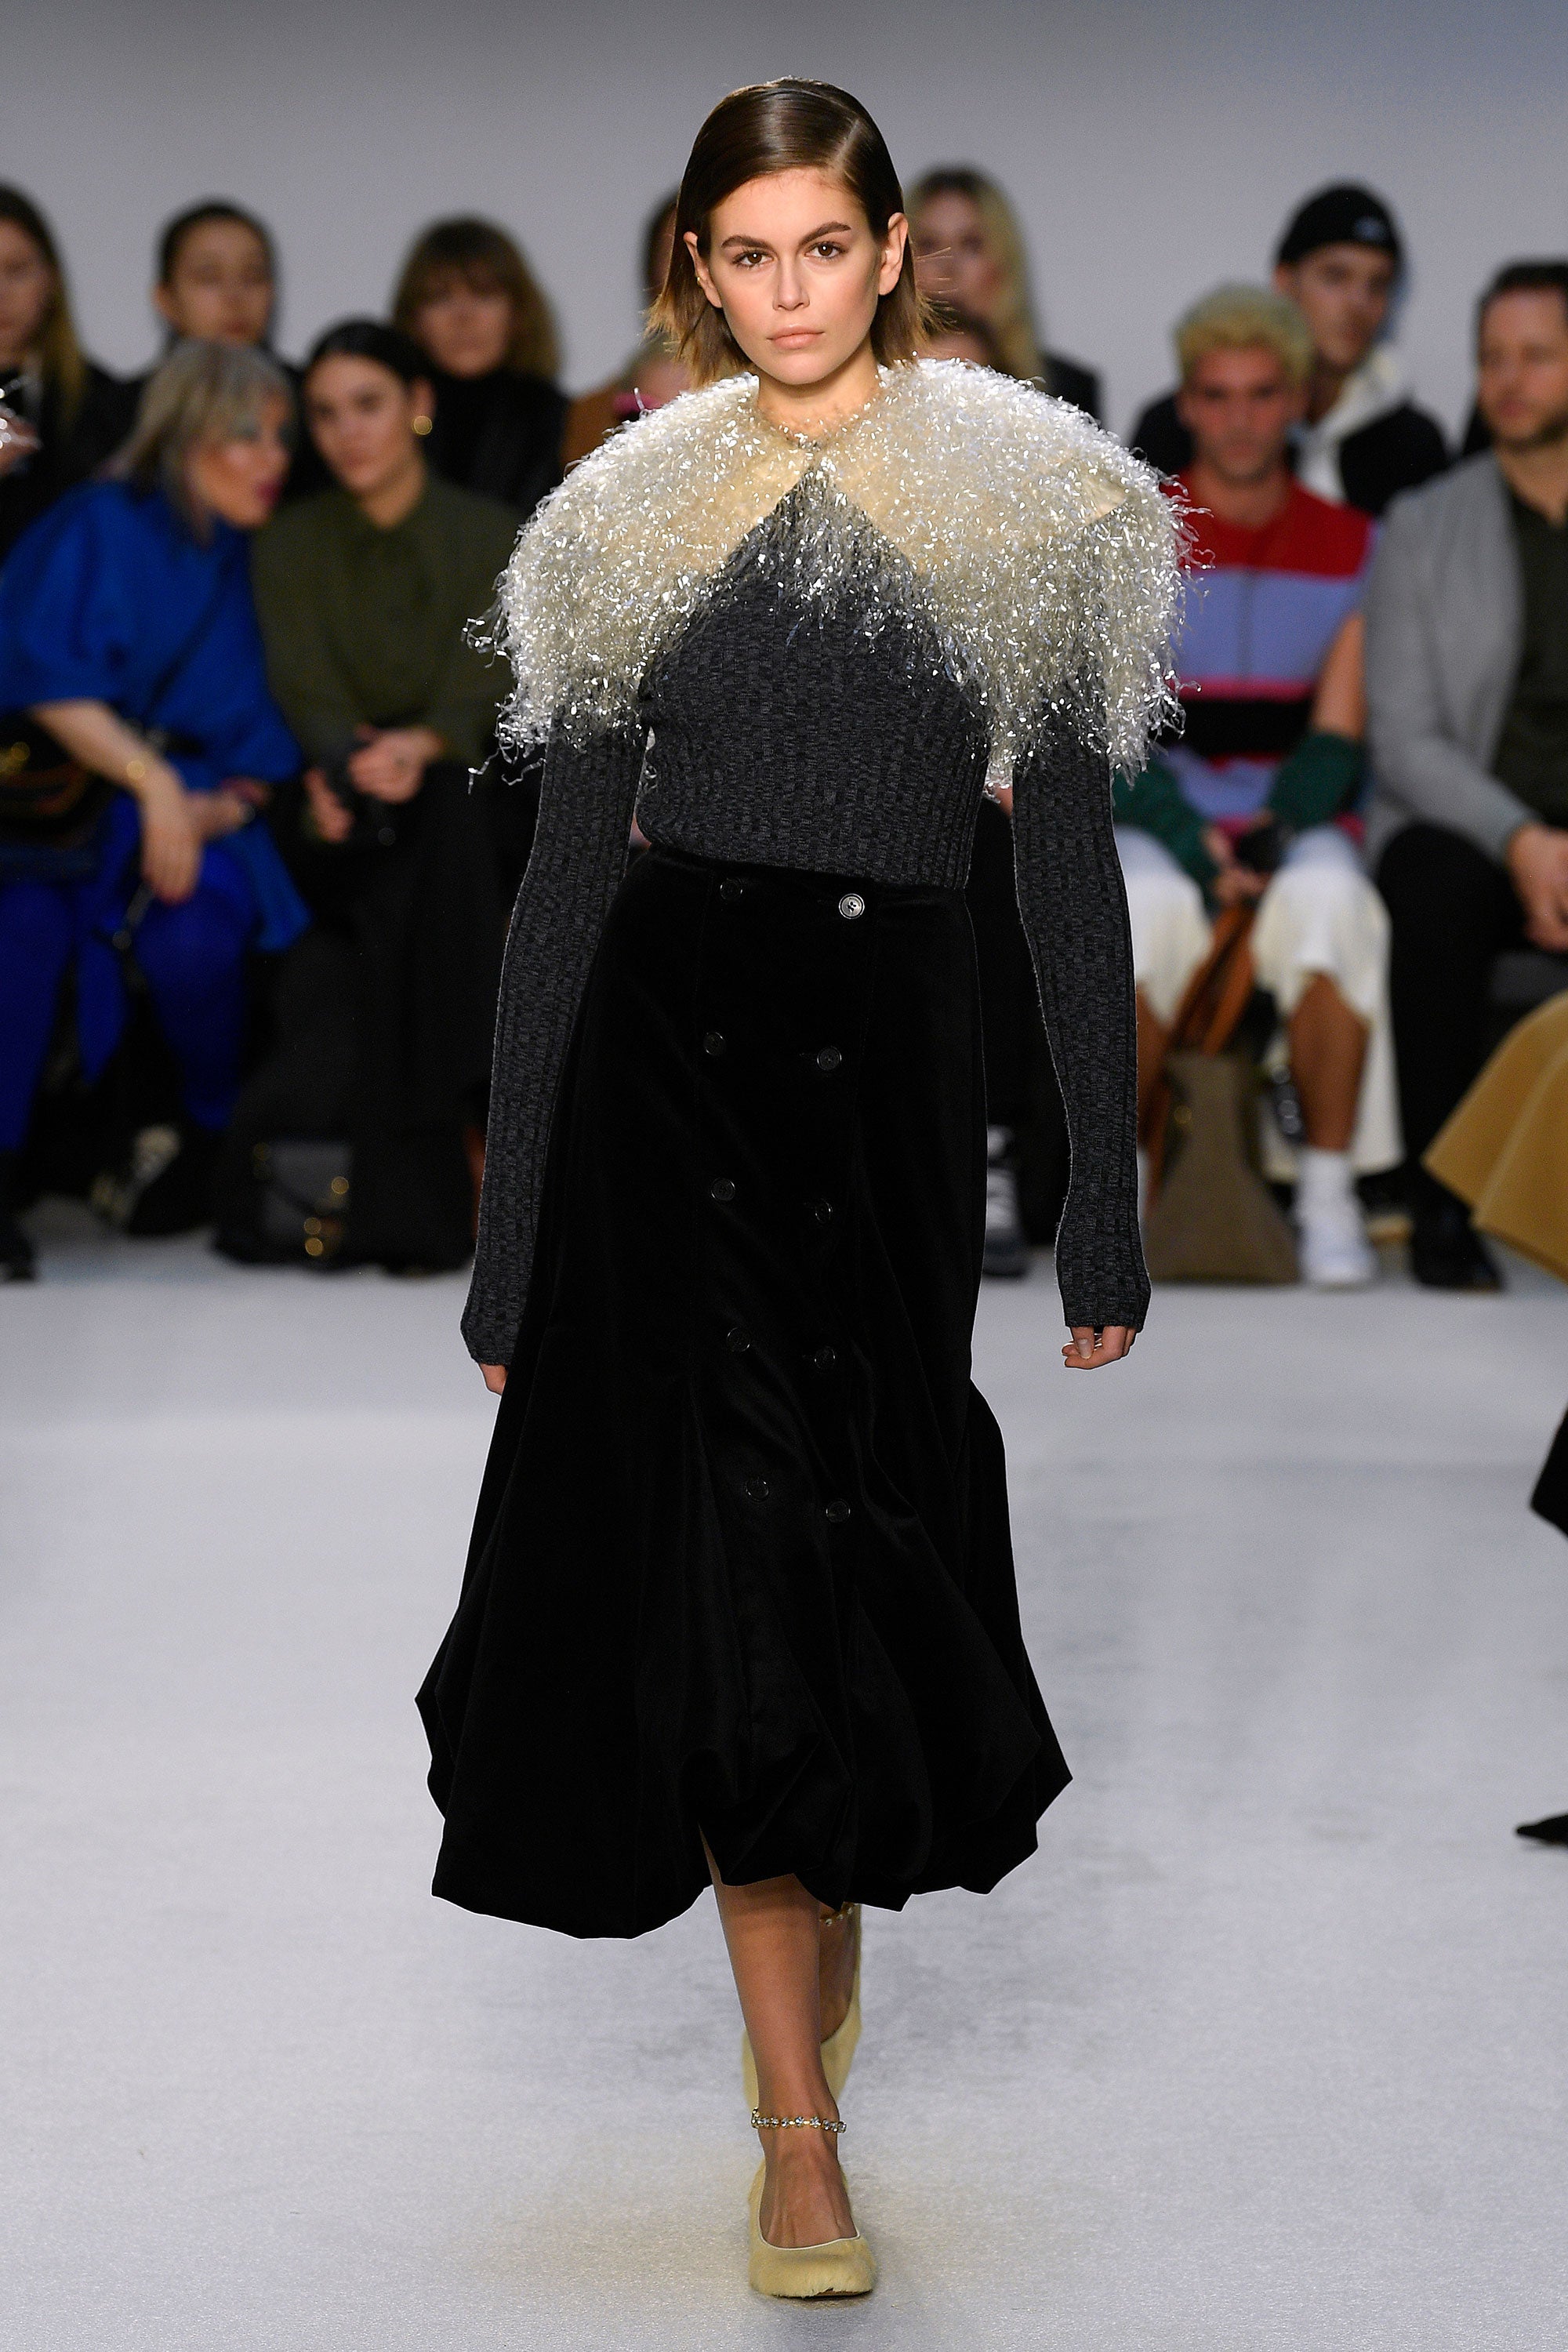 Oversized knits hit London catwalk at J.W. Anderson show